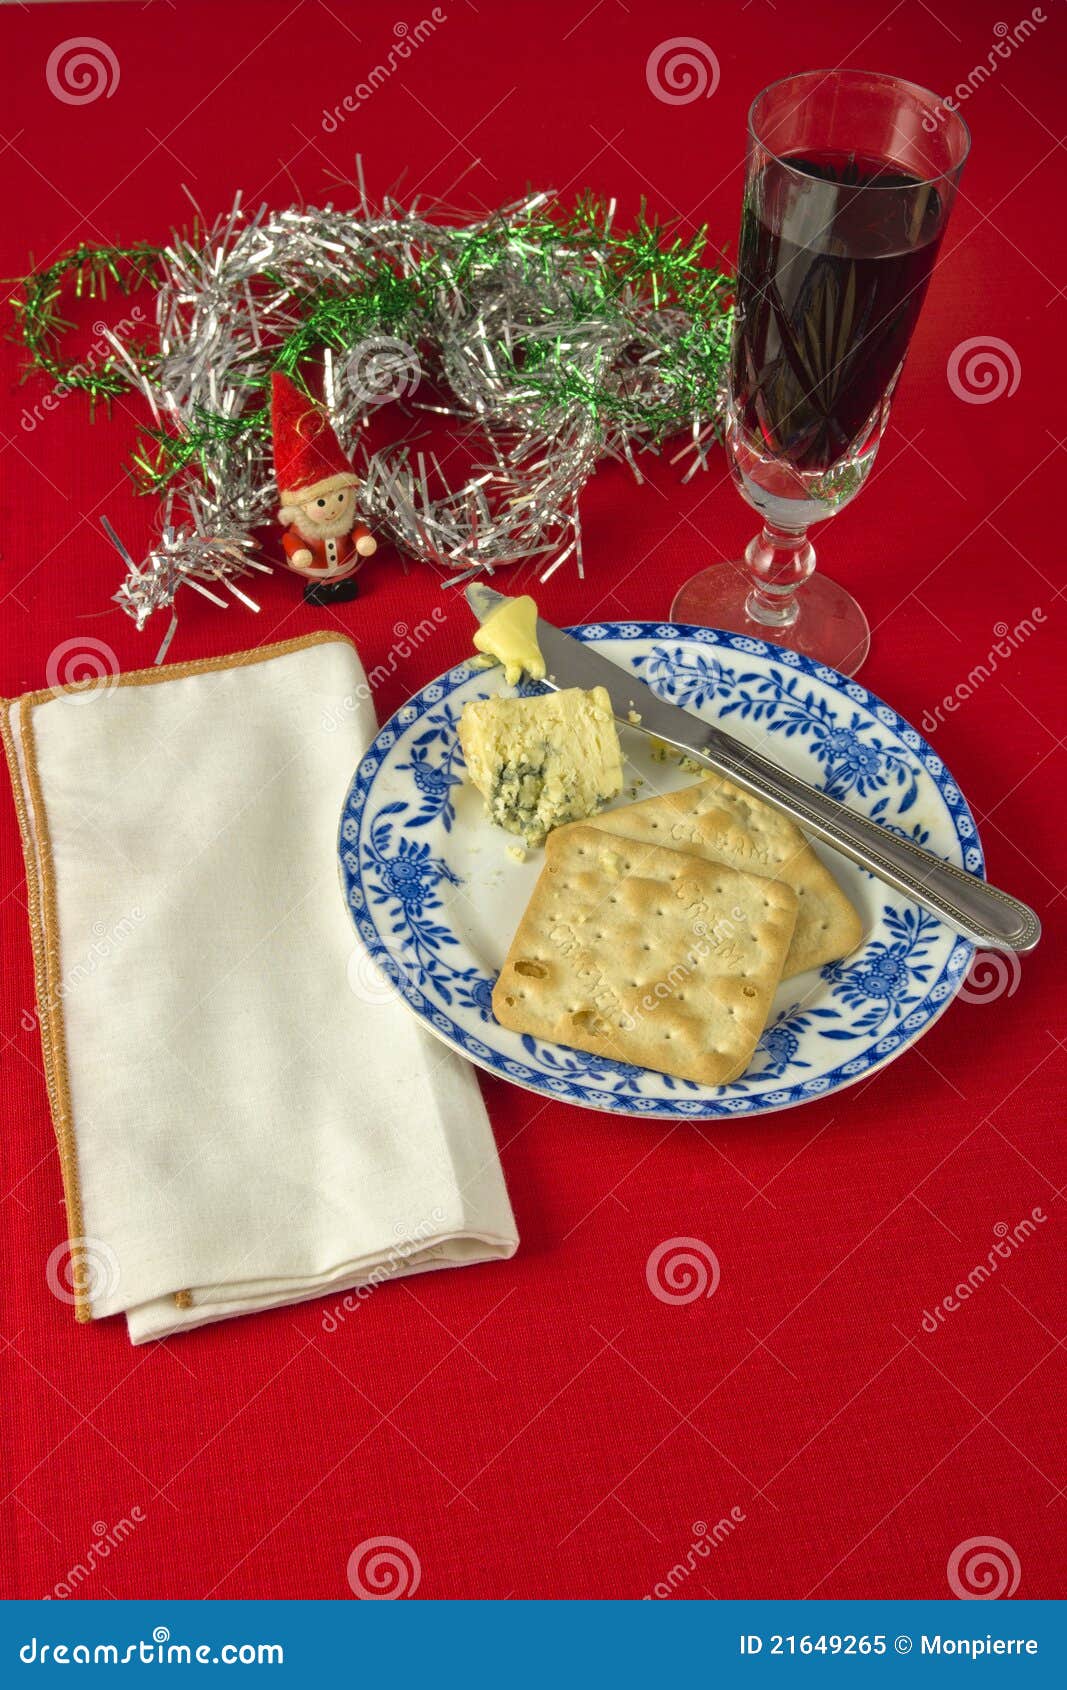 Christmas Cheese and Wine. Two crackers and Stilton cheese on blue and white plate , with knife and butter. White napkin against red table cloth, with decorations.Glass of red wine.